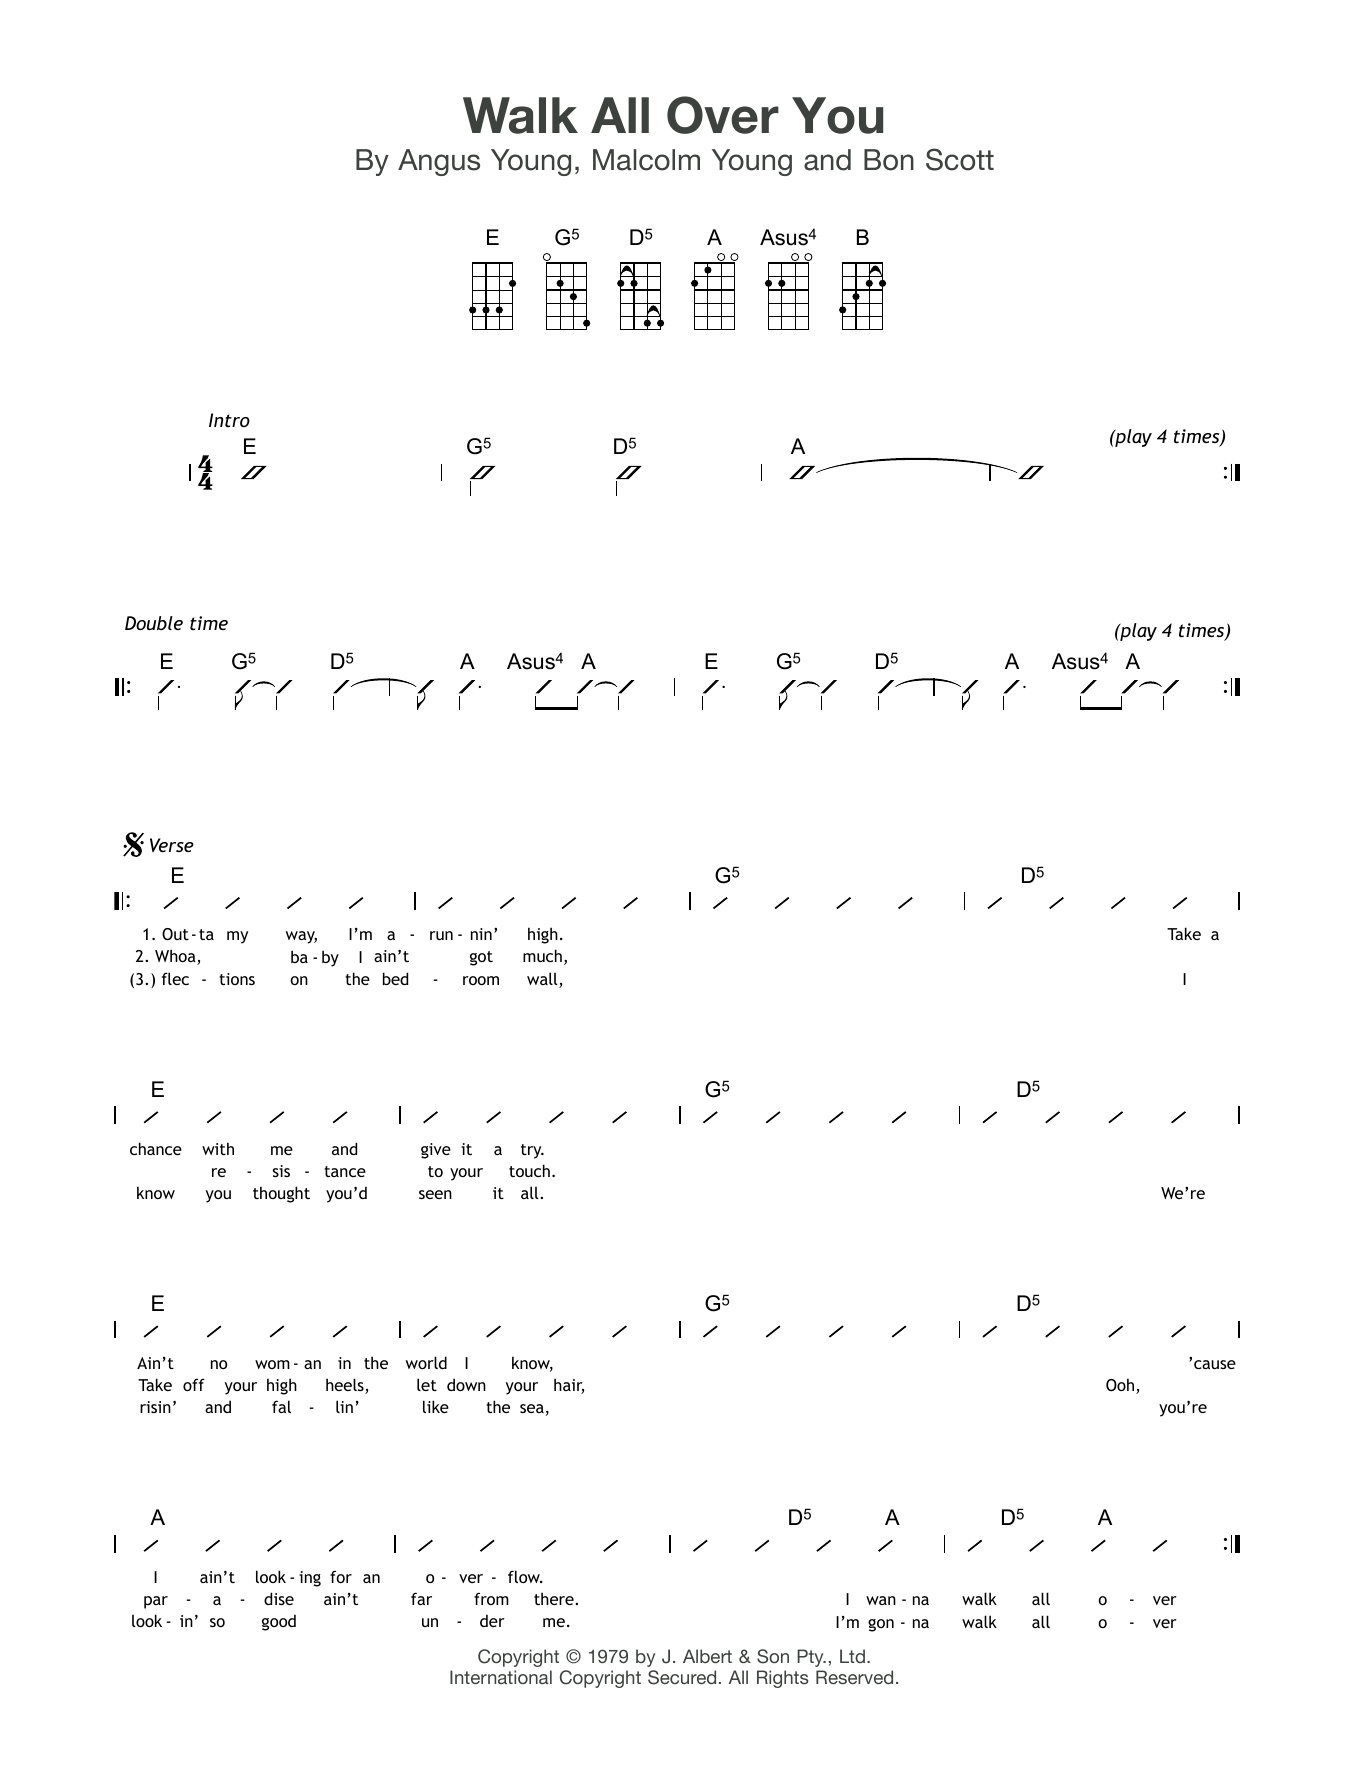 Download AC/DC Walk All Over You Sheet Music